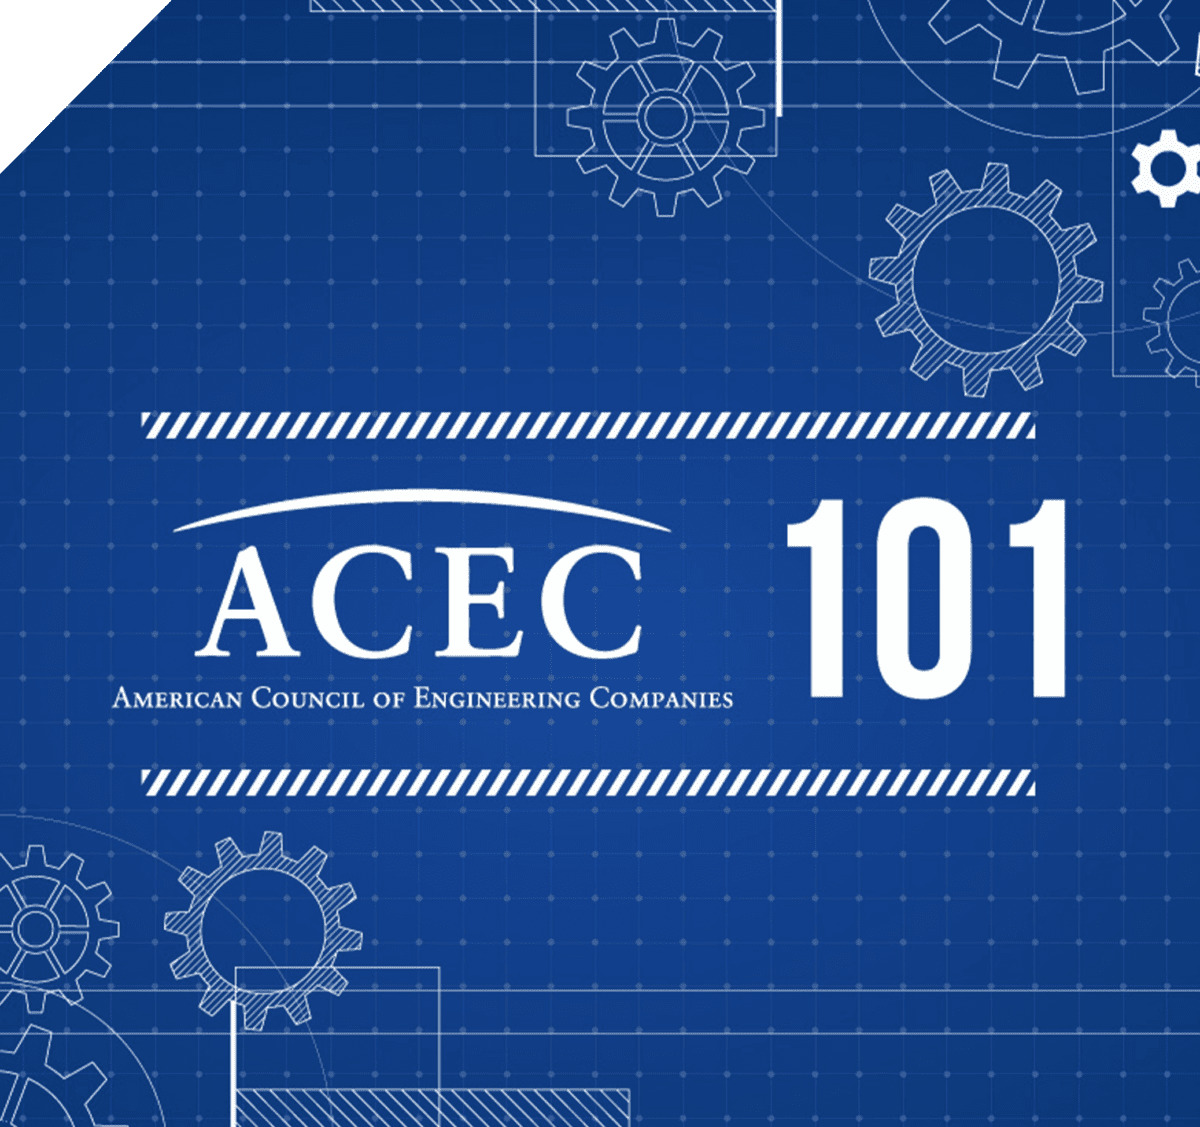 ACEC 101 Banner Image Logo With Blueprint Background